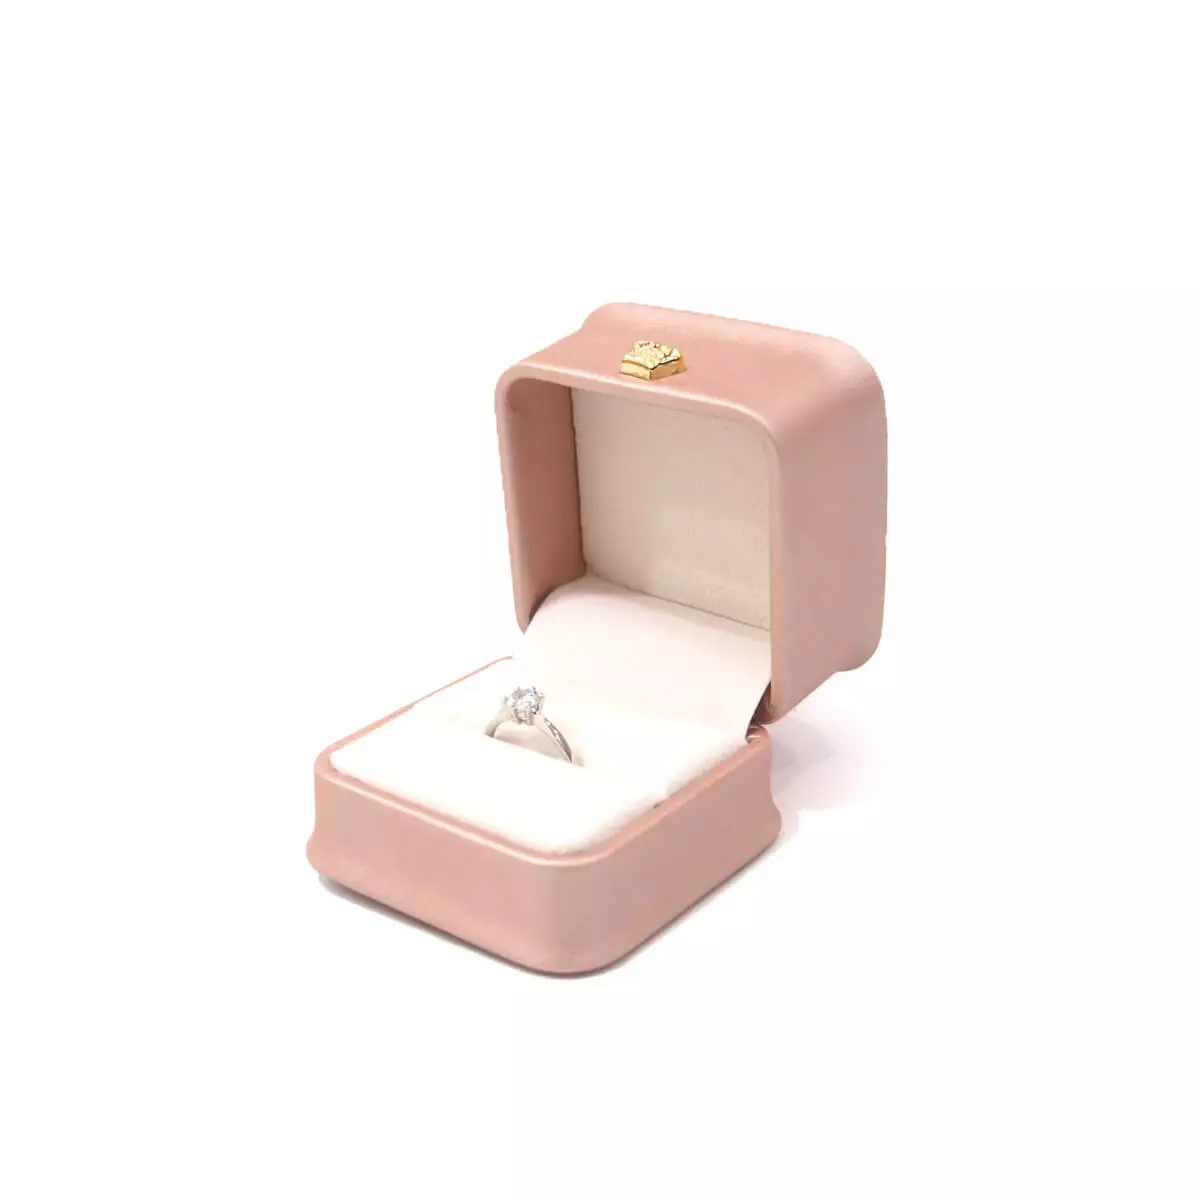 posie ring box in pink opening right side view